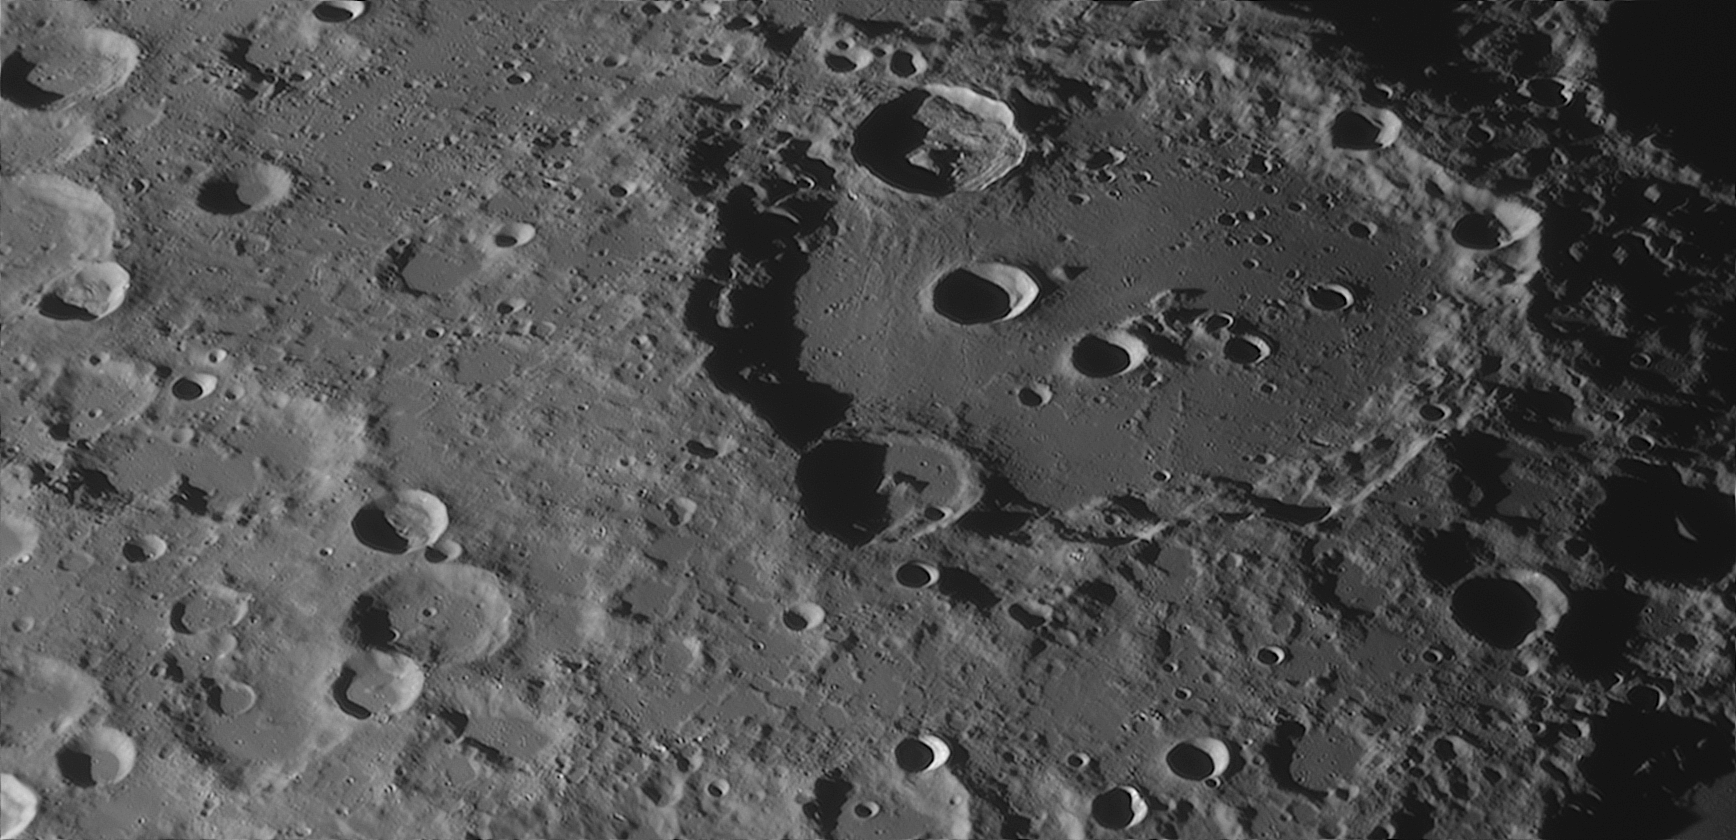 6089bf77f0821_Clavius2.png.e4010a2abd17a55dcae322b27b7150b0.png